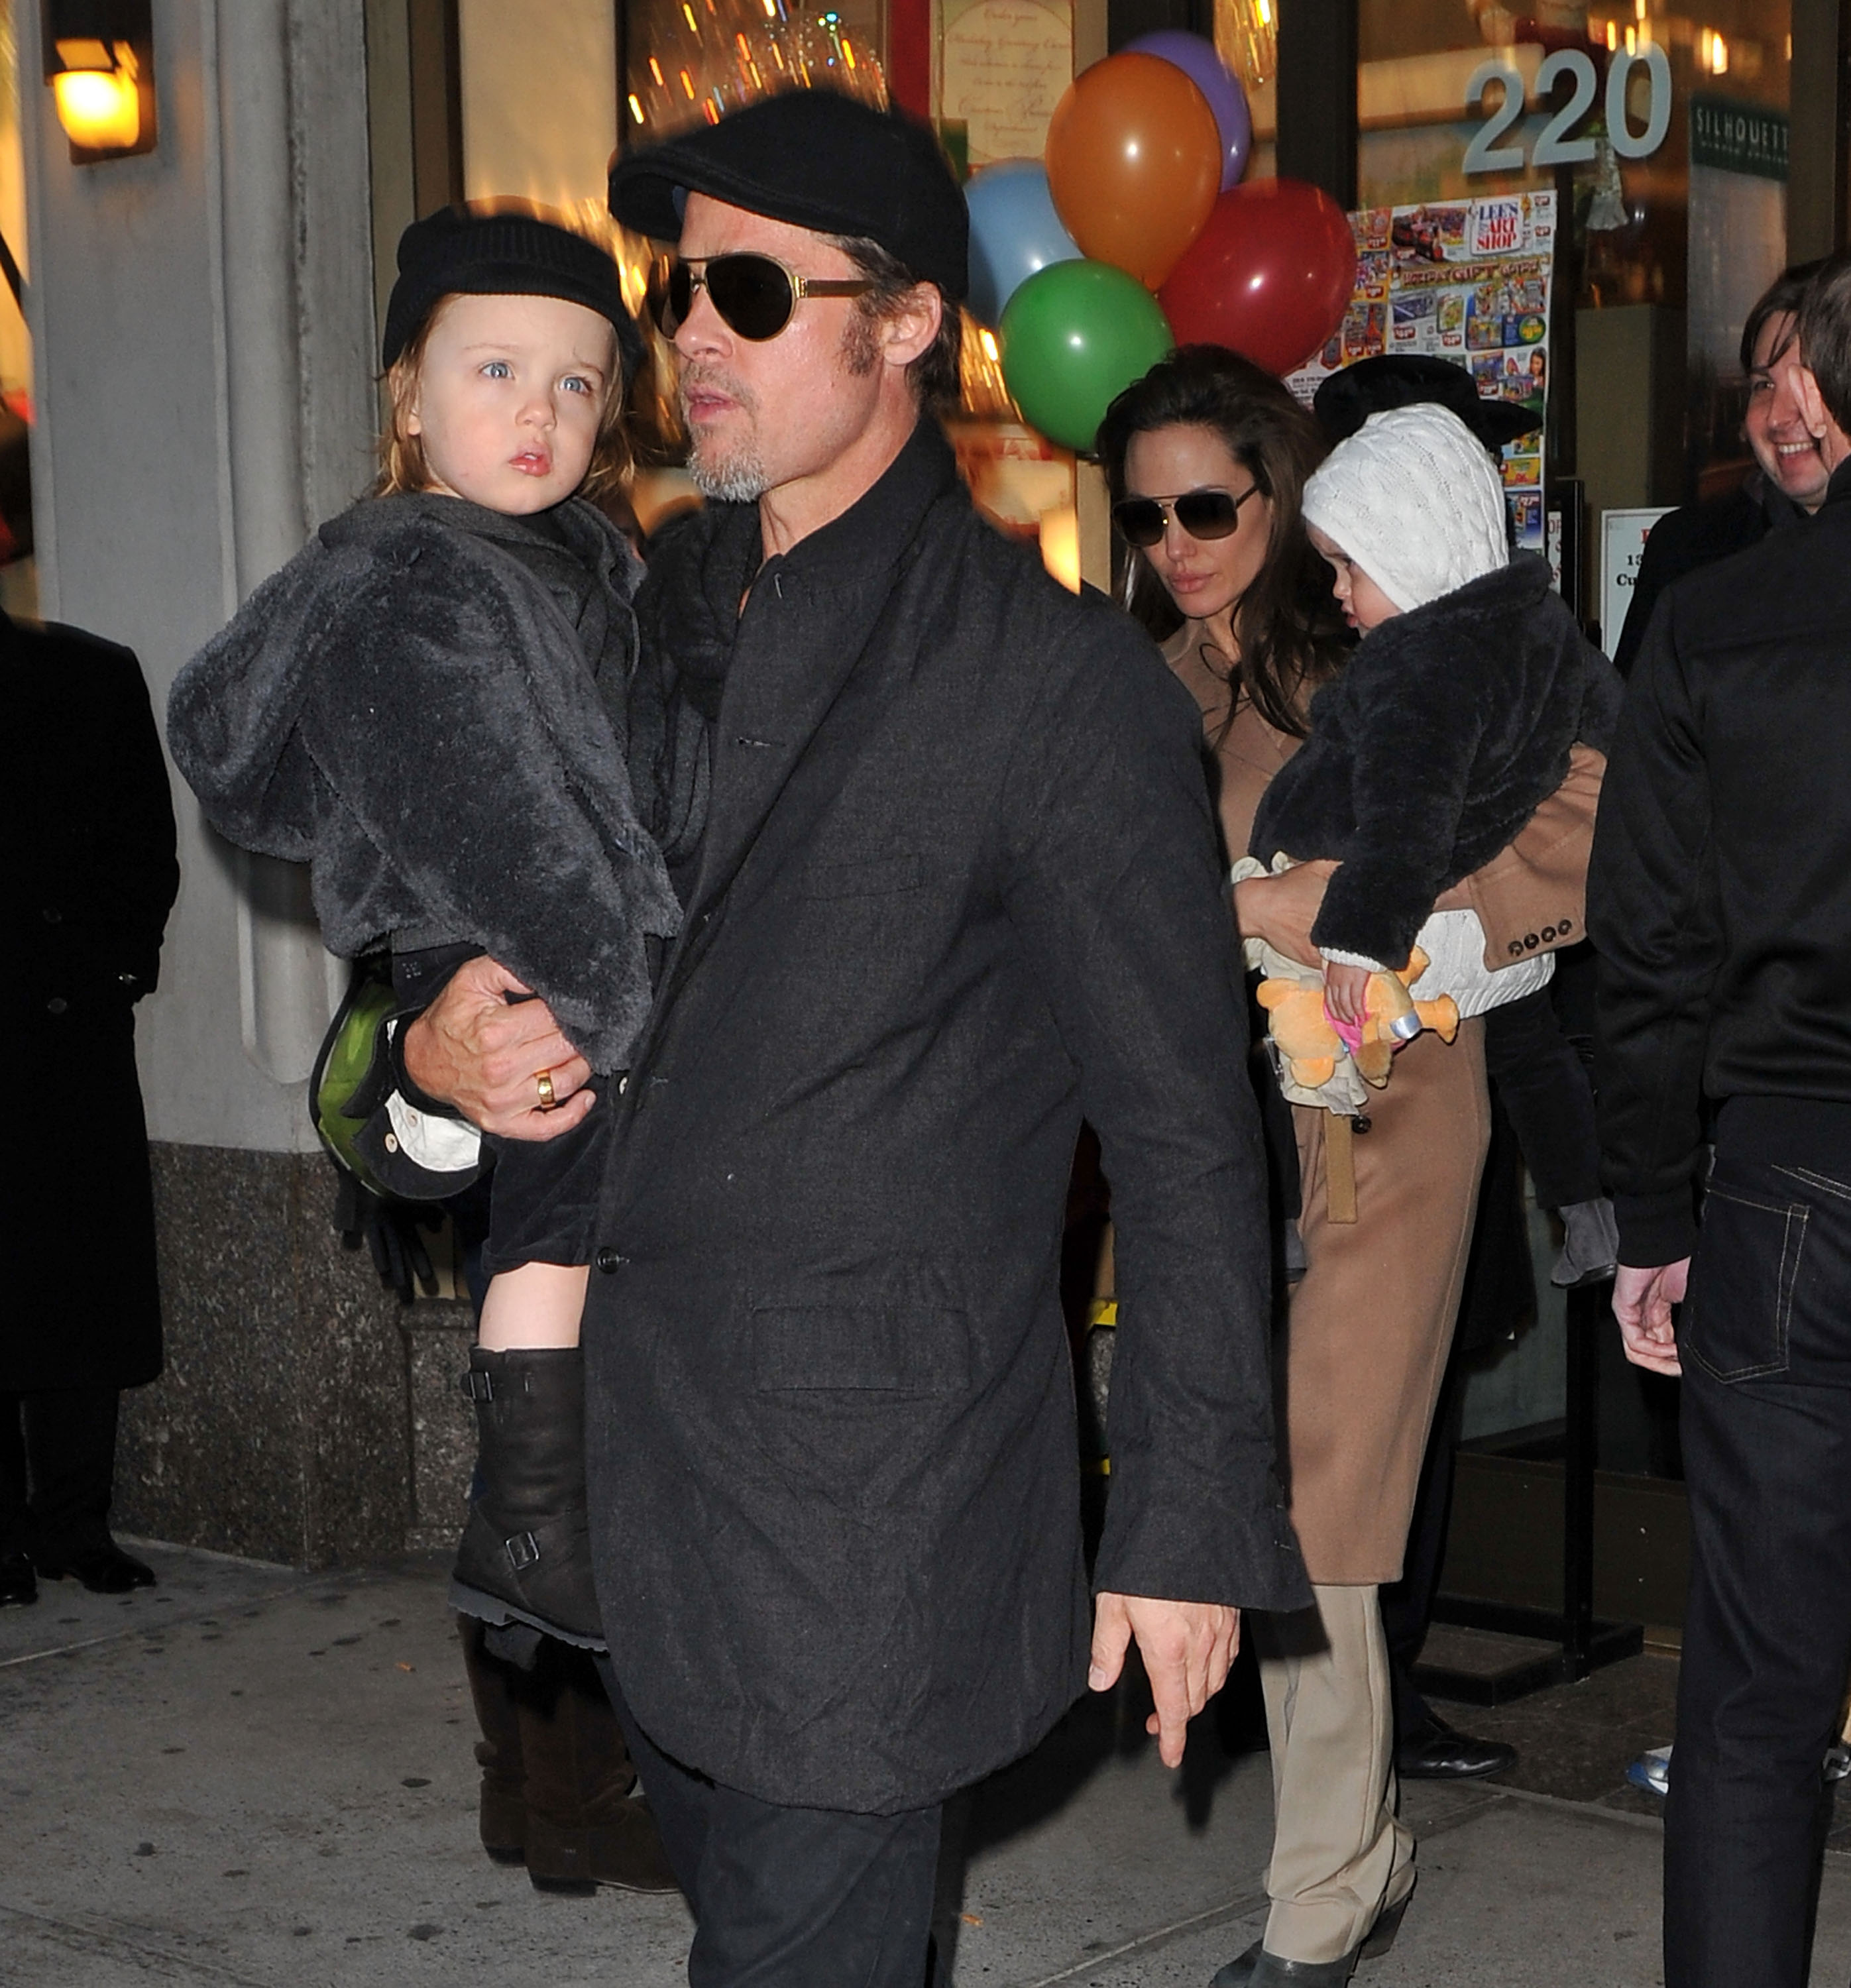 Brad Pitt and Angelina Jolie visit Lee's Art Shop with their children Vivienne and Knox Jolie-Pitt on December 4, 2010 in New York City | Source: Getty Images